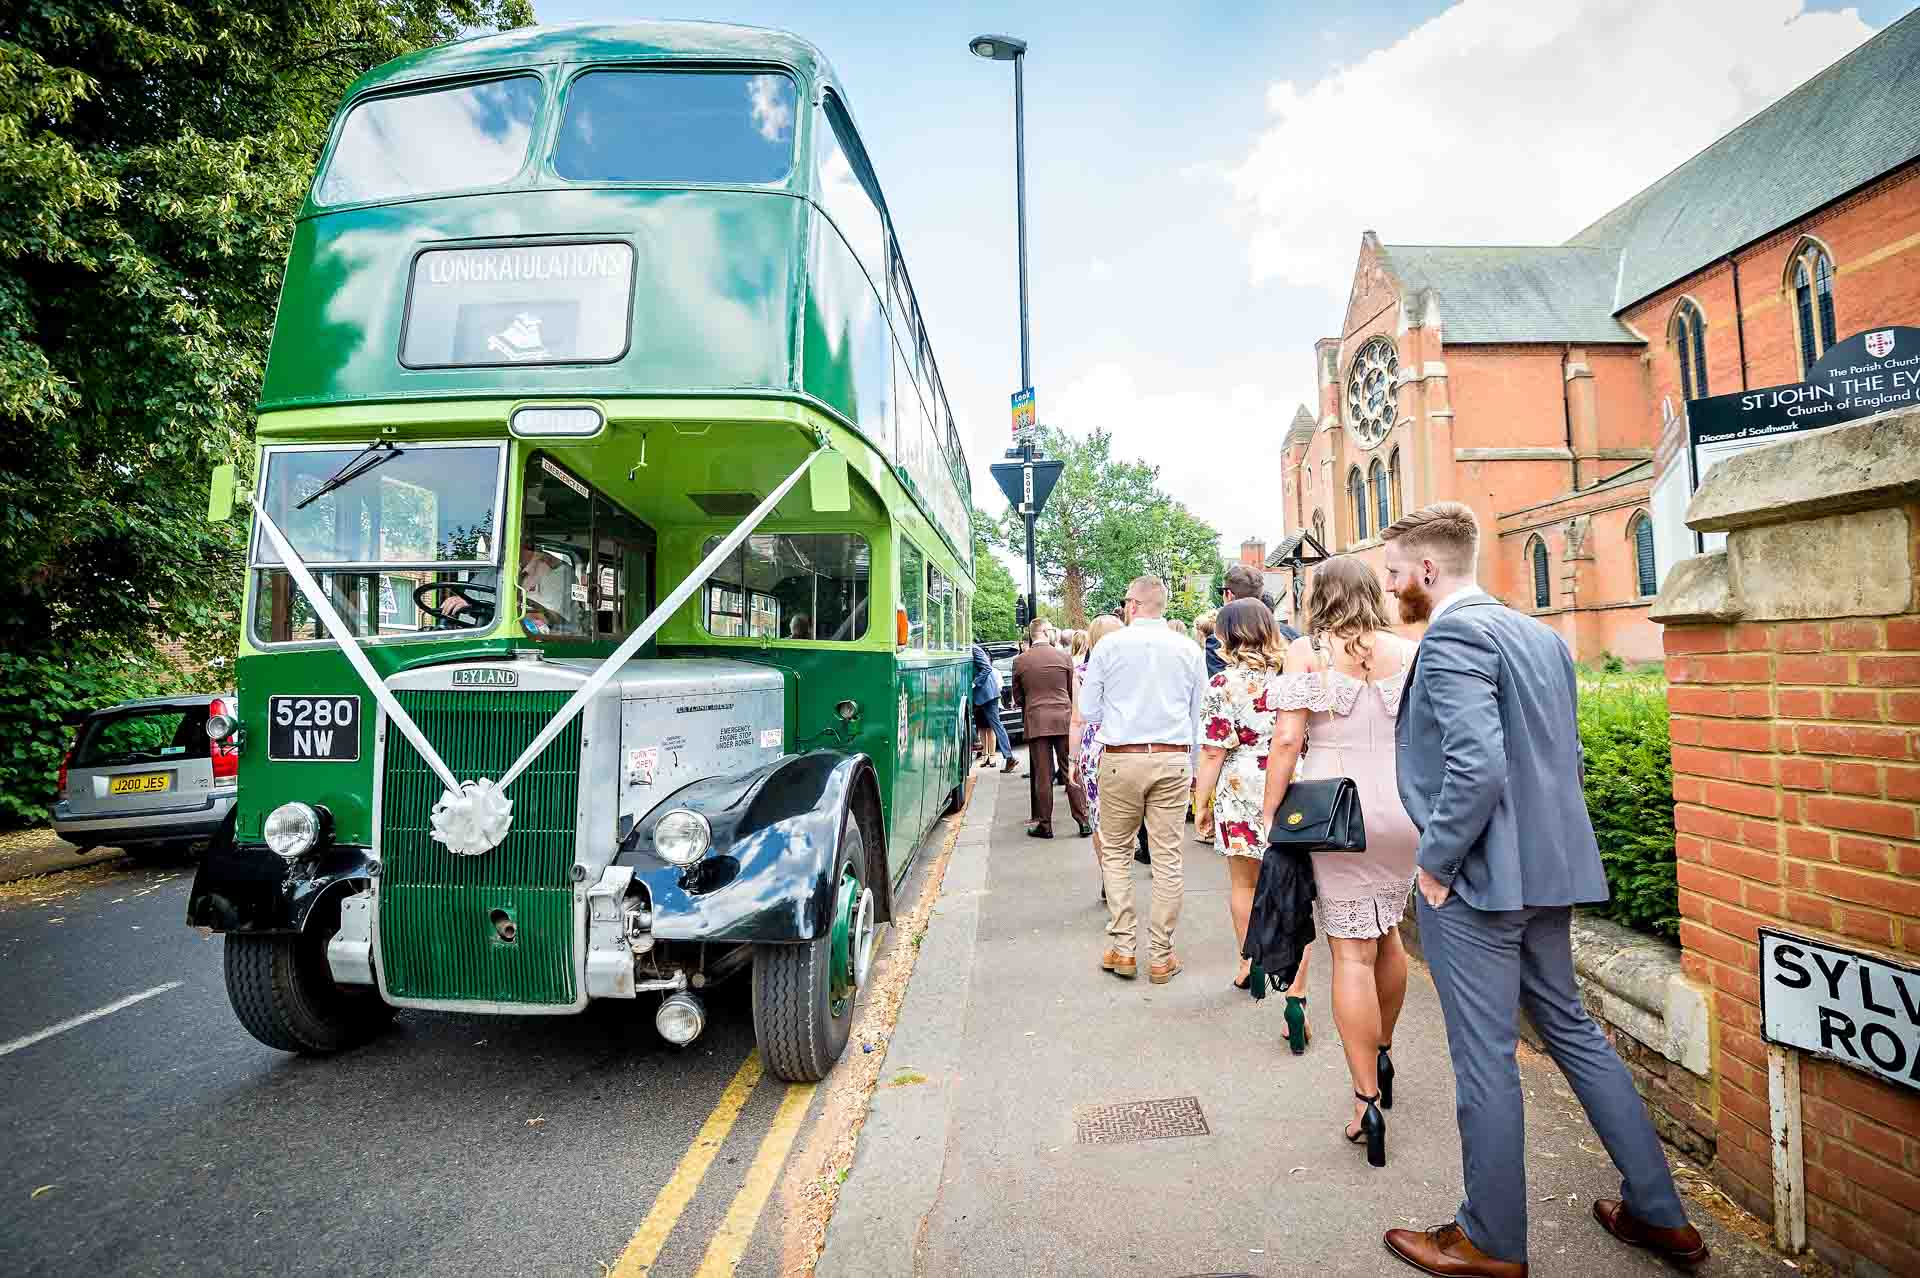 Wedding guests boarding green Routemaster bus outside church